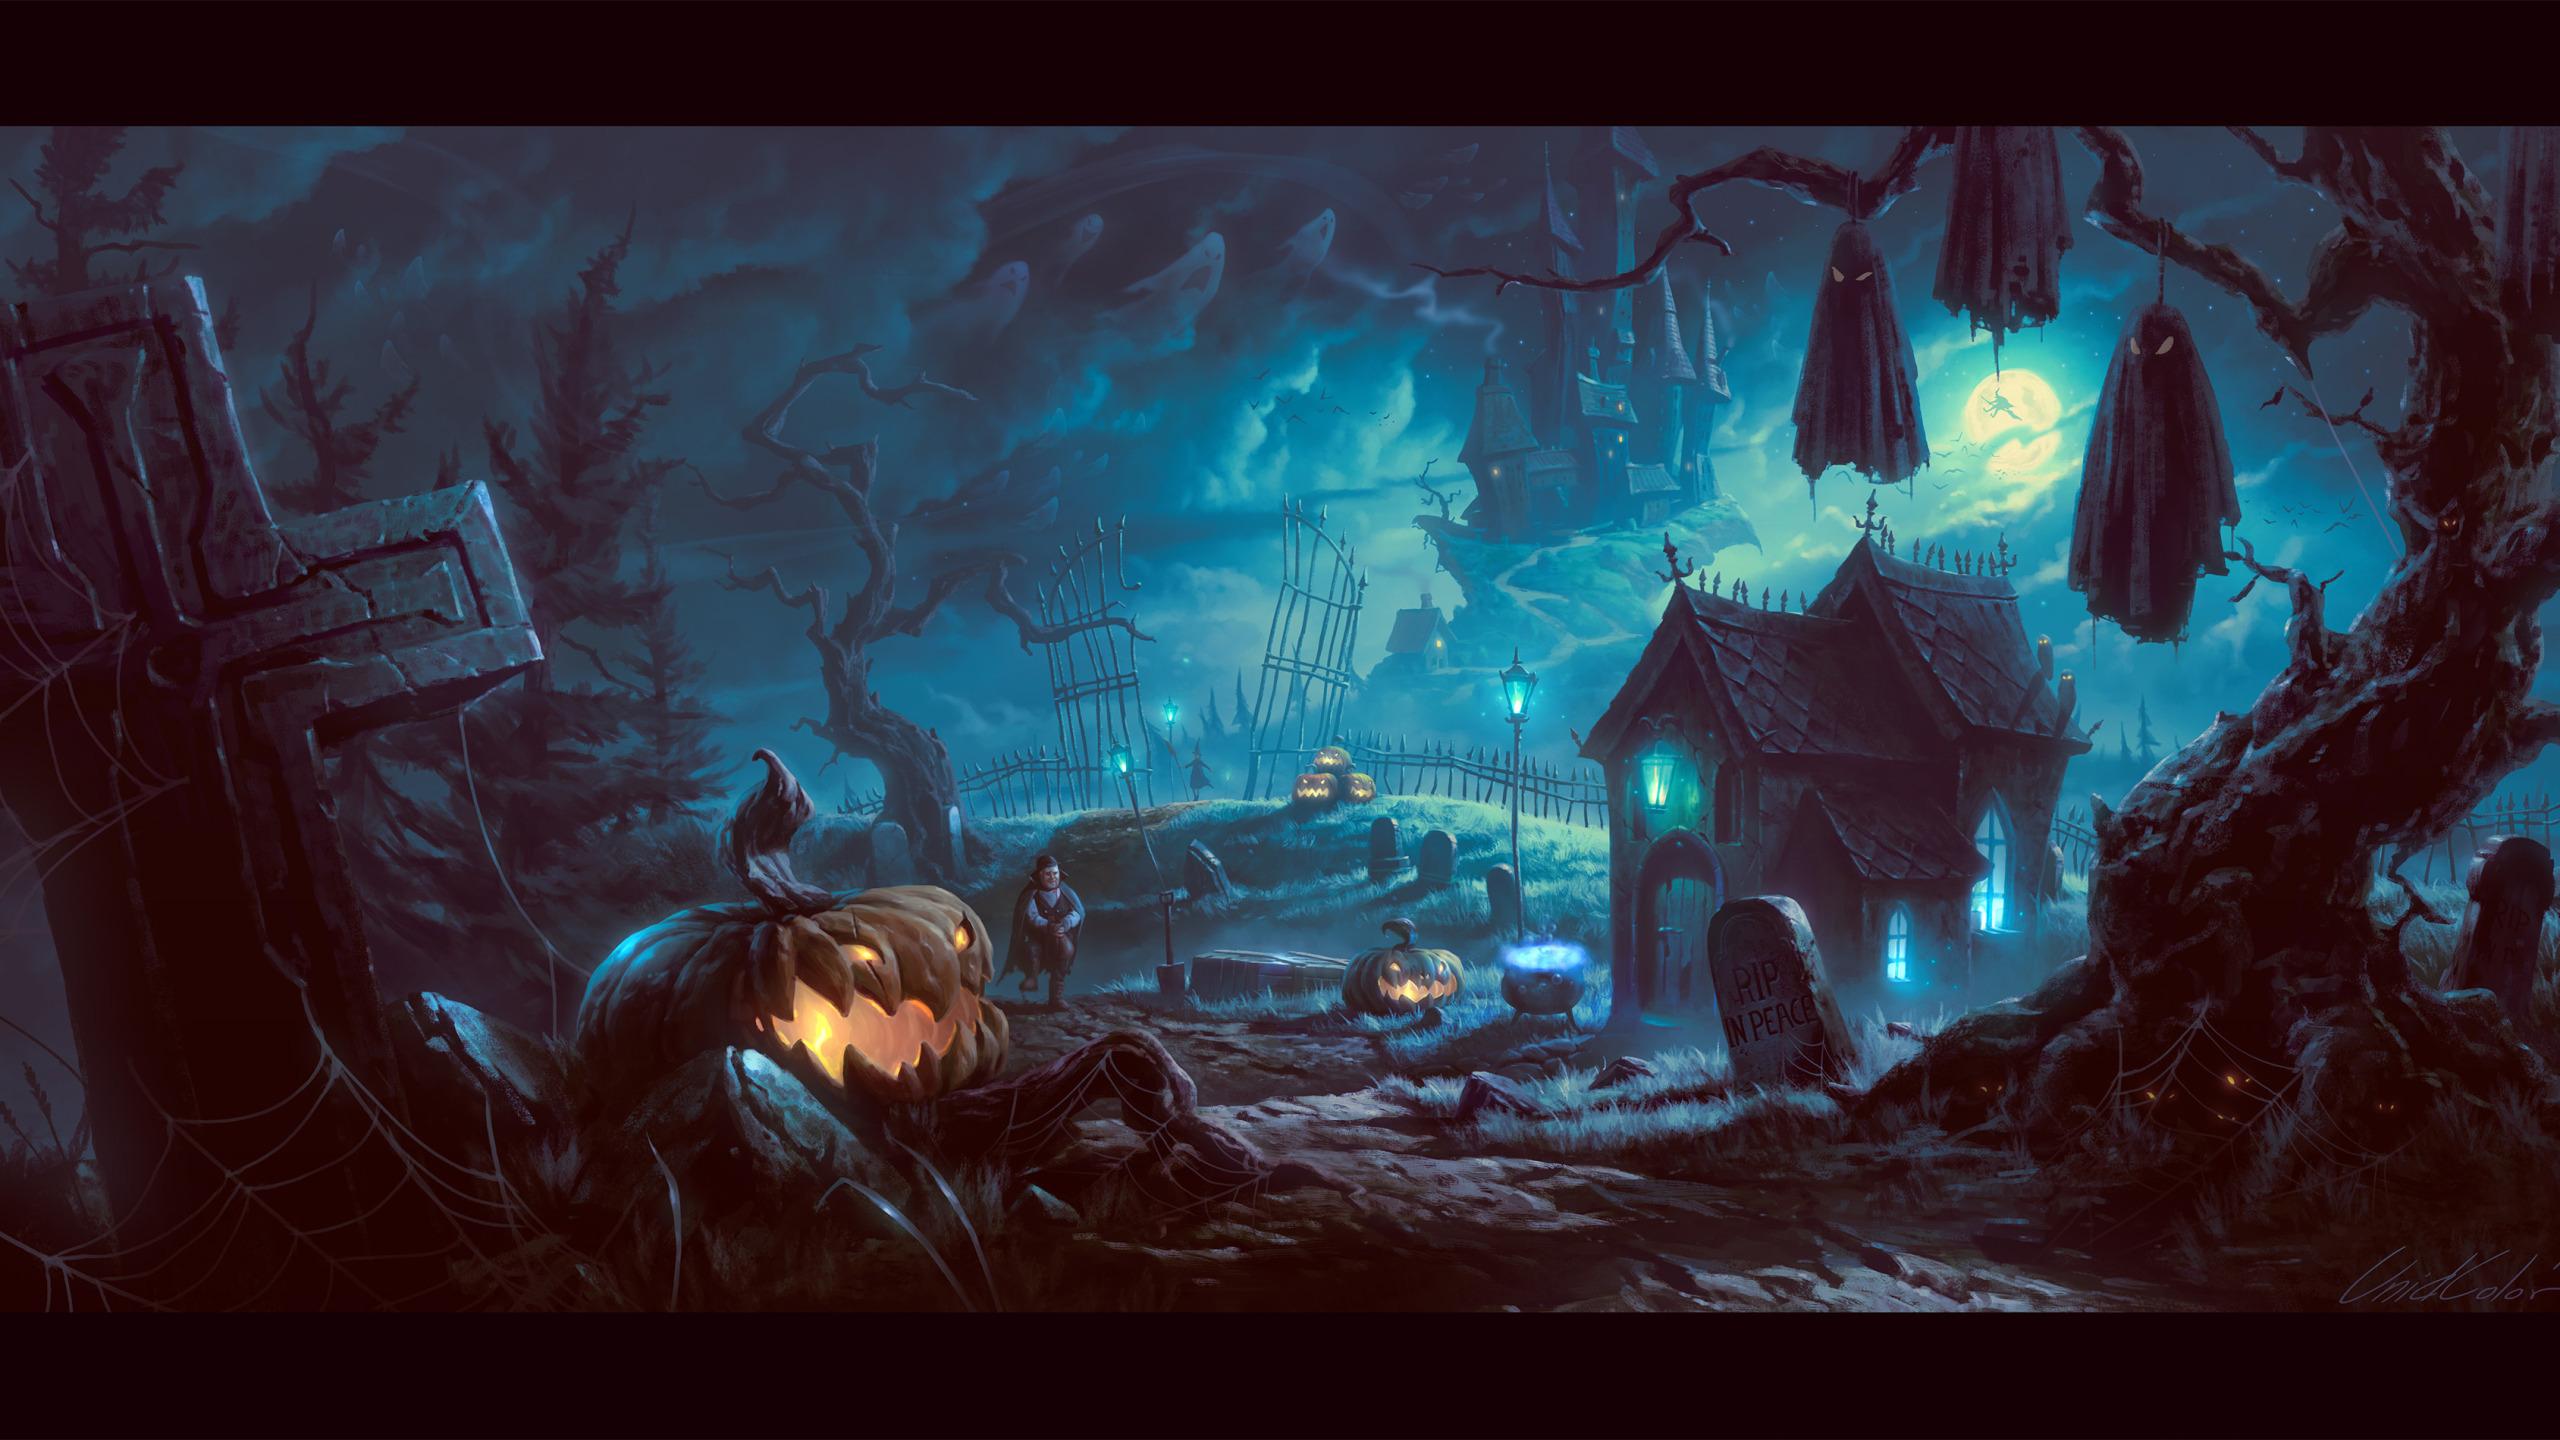 Halloween Night at the Cemetery widescreen wallpaper. Wide